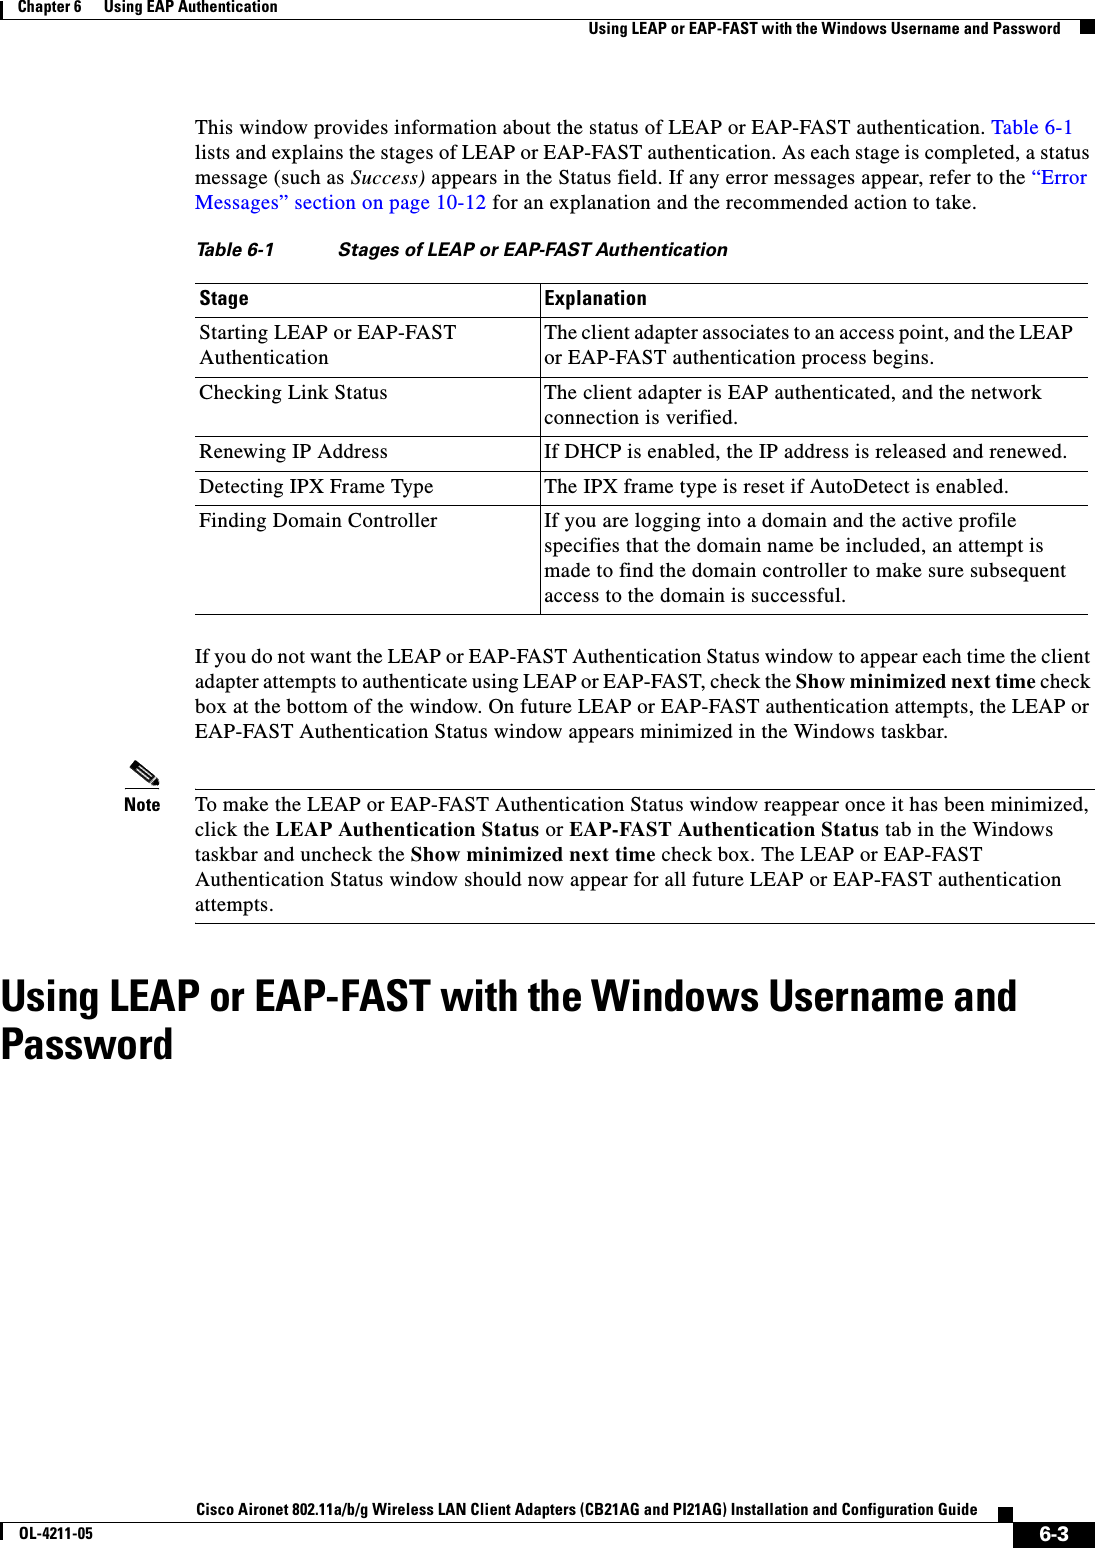 6-3Cisco Aironet 802.11a/b/g Wireless LAN Client Adapters (CB21AG and PI21AG) Installation and Configuration GuideOL-4211-05Chapter 6      Using EAP AuthenticationUsing LEAP or EAP-FAST with the Windows Username and PasswordThis window provides information about the status of LEAP or EAP-FAST authentication. Table 6-1lists and explains the stages of LEAP or EAP-FAST authentication. As each stage is completed, a status message (such as Success) appears in the Status field. If any error messages appear, refer to the “Error Messages” section on page 10-12 for an explanation and the recommended action to take.If you do not want the LEAP or EAP-FAST Authentication Status window to appear each time the client adapter attempts to authenticate using LEAP or EAP-FAST, check the Show minimized next time check box at the bottom of the window. On future LEAP or EAP-FAST authentication attempts, the LEAP or EAP-FAST Authentication Status window appears minimized in the Windows taskbar.Note To make the LEAP or EAP-FAST Authentication Status window reappear once it has been minimized, click the LEAP Authentication Status or EAP-FAST Authentication Status tab in the Windows taskbar and uncheck the Show minimized next time check box. The LEAP or EAP-FAST Authentication Status window should now appear for all future LEAP or EAP-FAST authentication attempts.Using LEAP or EAP-FAST with the Windows Username and PasswordTable 6-1 Stages of LEAP or EAP-FAST Authentication Stage ExplanationStarting LEAP or EAP-FAST AuthenticationThe client adapter associates to an access point, and the LEAP or EAP-FAST authentication process begins.Checking Link Status The client adapter is EAP authenticated, and the network connection is verified.Renewing IP Address If DHCP is enabled, the IP address is released and renewed.Detecting IPX Frame Type The IPX frame type is reset if AutoDetect is enabled.Finding Domain Controller If you are logging into a domain and the active profile specifies that the domain name be included, an attempt is made to find the domain controller to make sure subsequent access to the domain is successful.